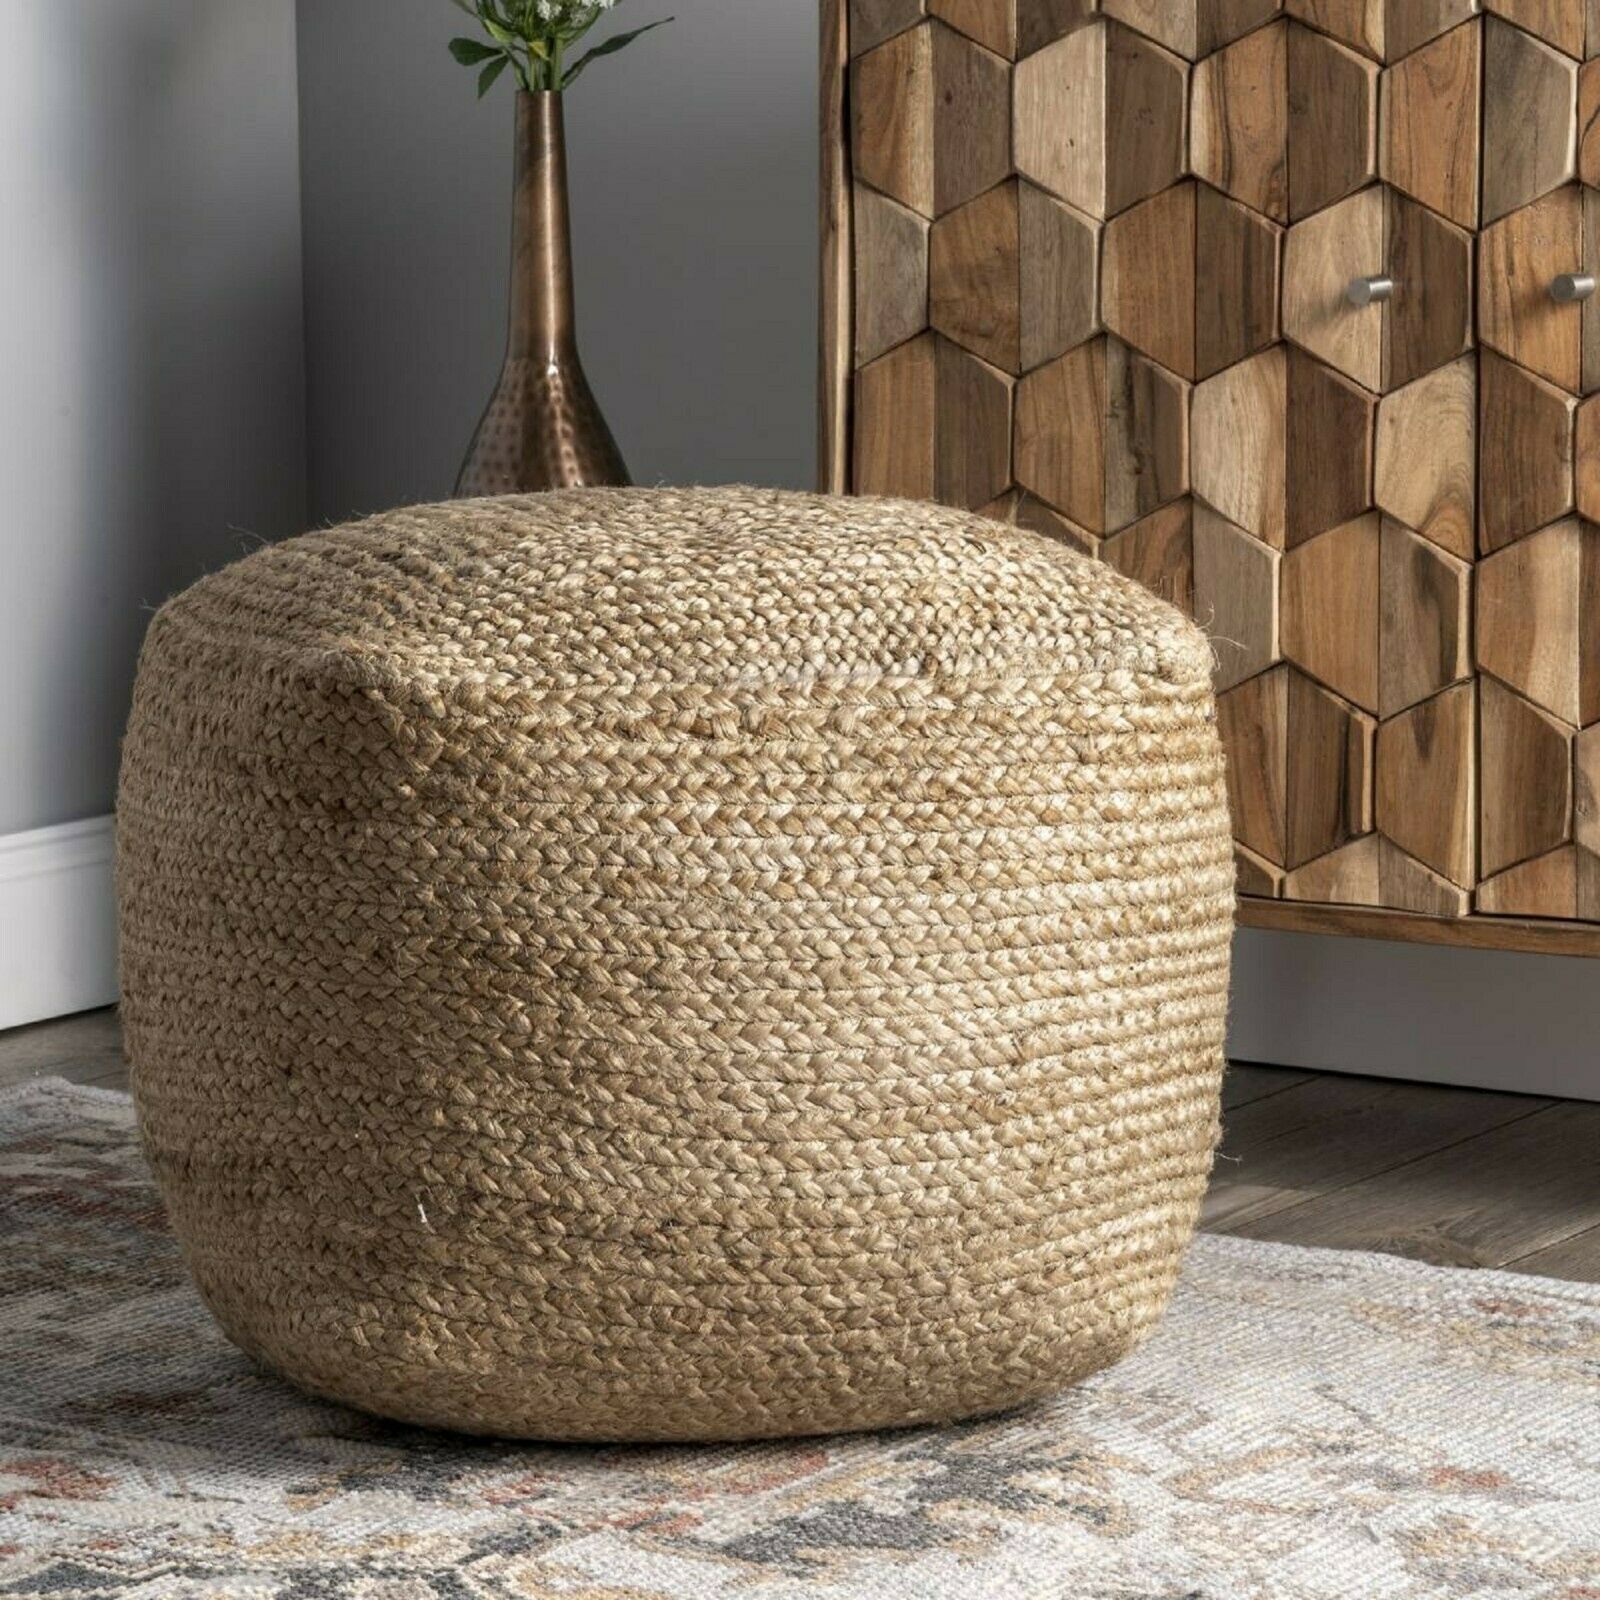 Pouf Natural Jute Cover Home Décor Braided Living Room Ottoman Foot Stool  Cover | Ebay Regarding Natural Ottomans (View 9 of 15)